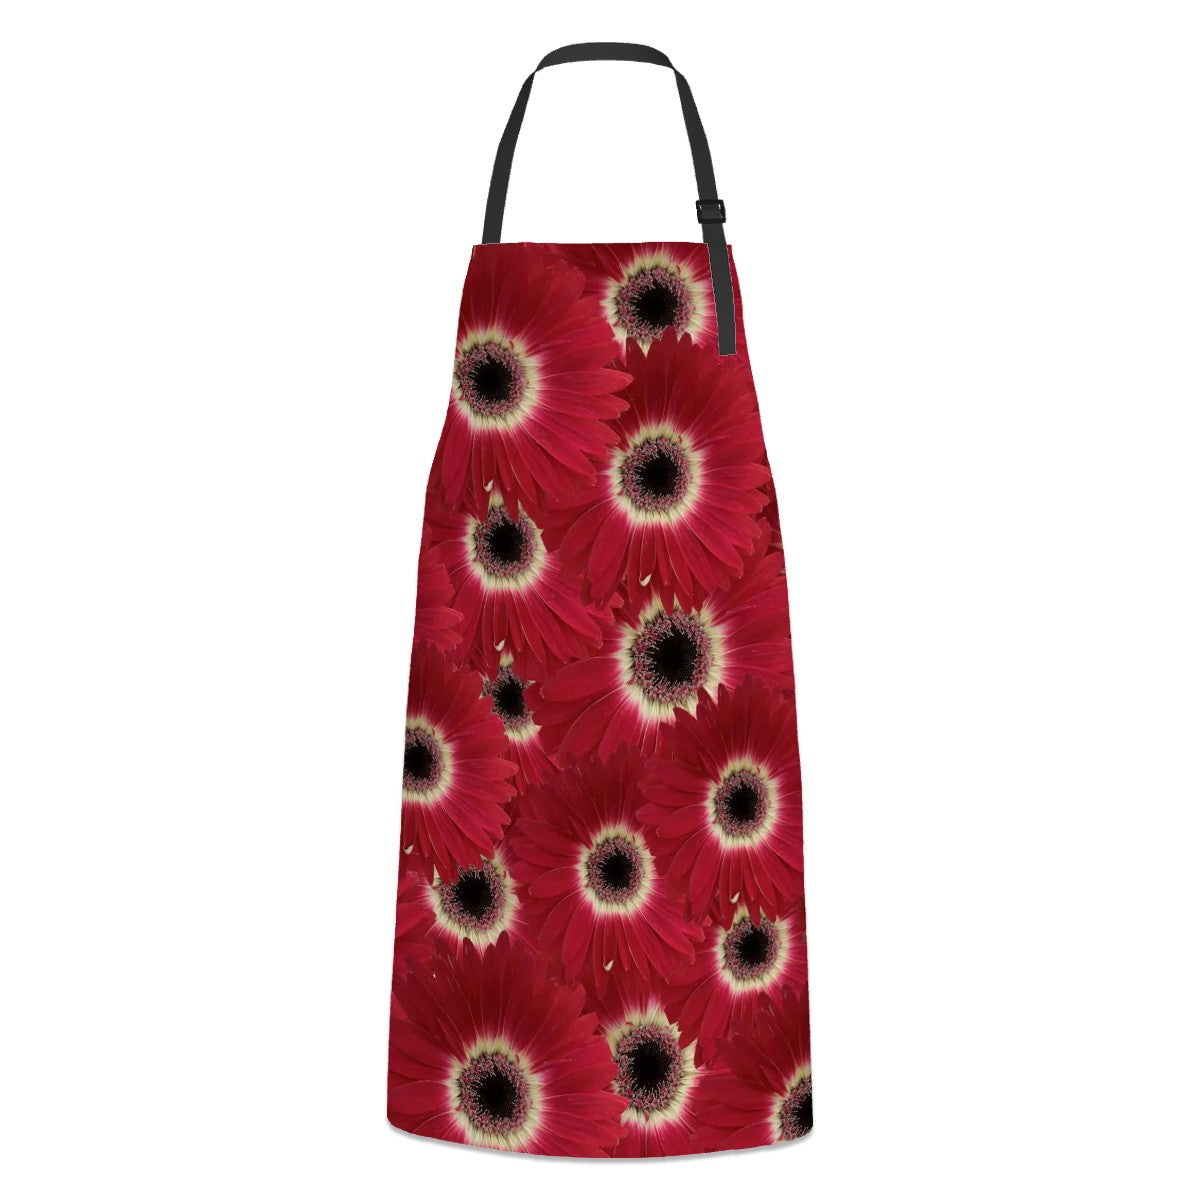 red gerbera daisy floral pattern apron with two pockets